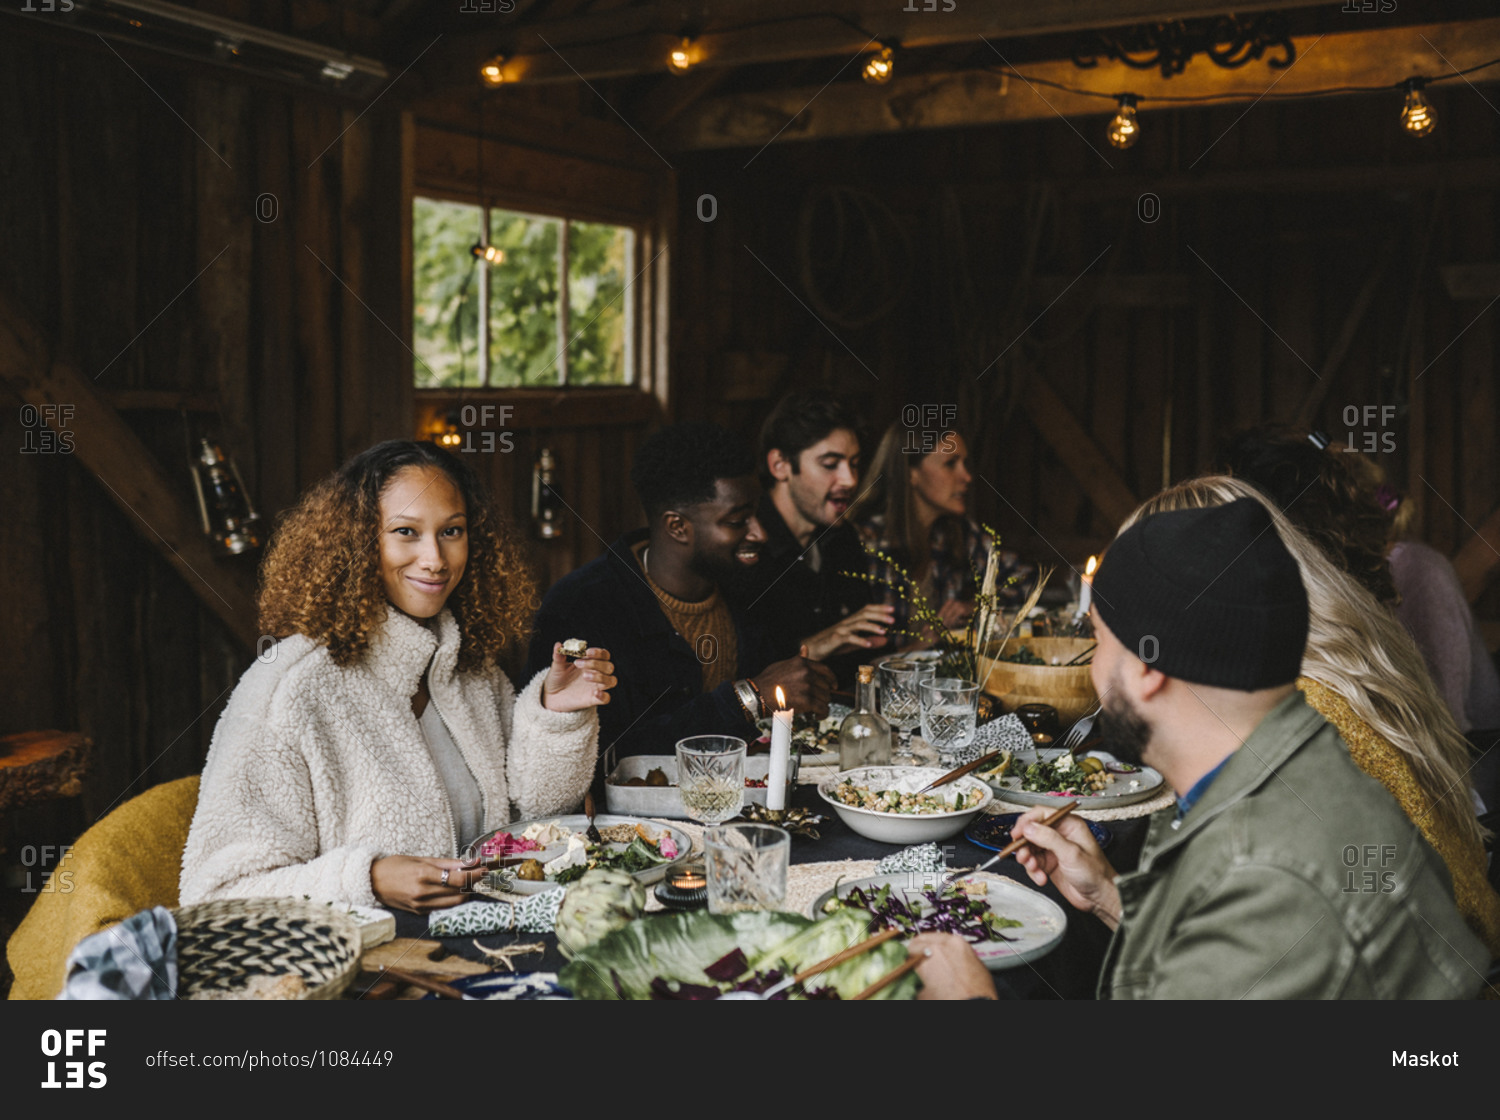 Portrait of smiling woman enjoying with male and female friends during social gathering